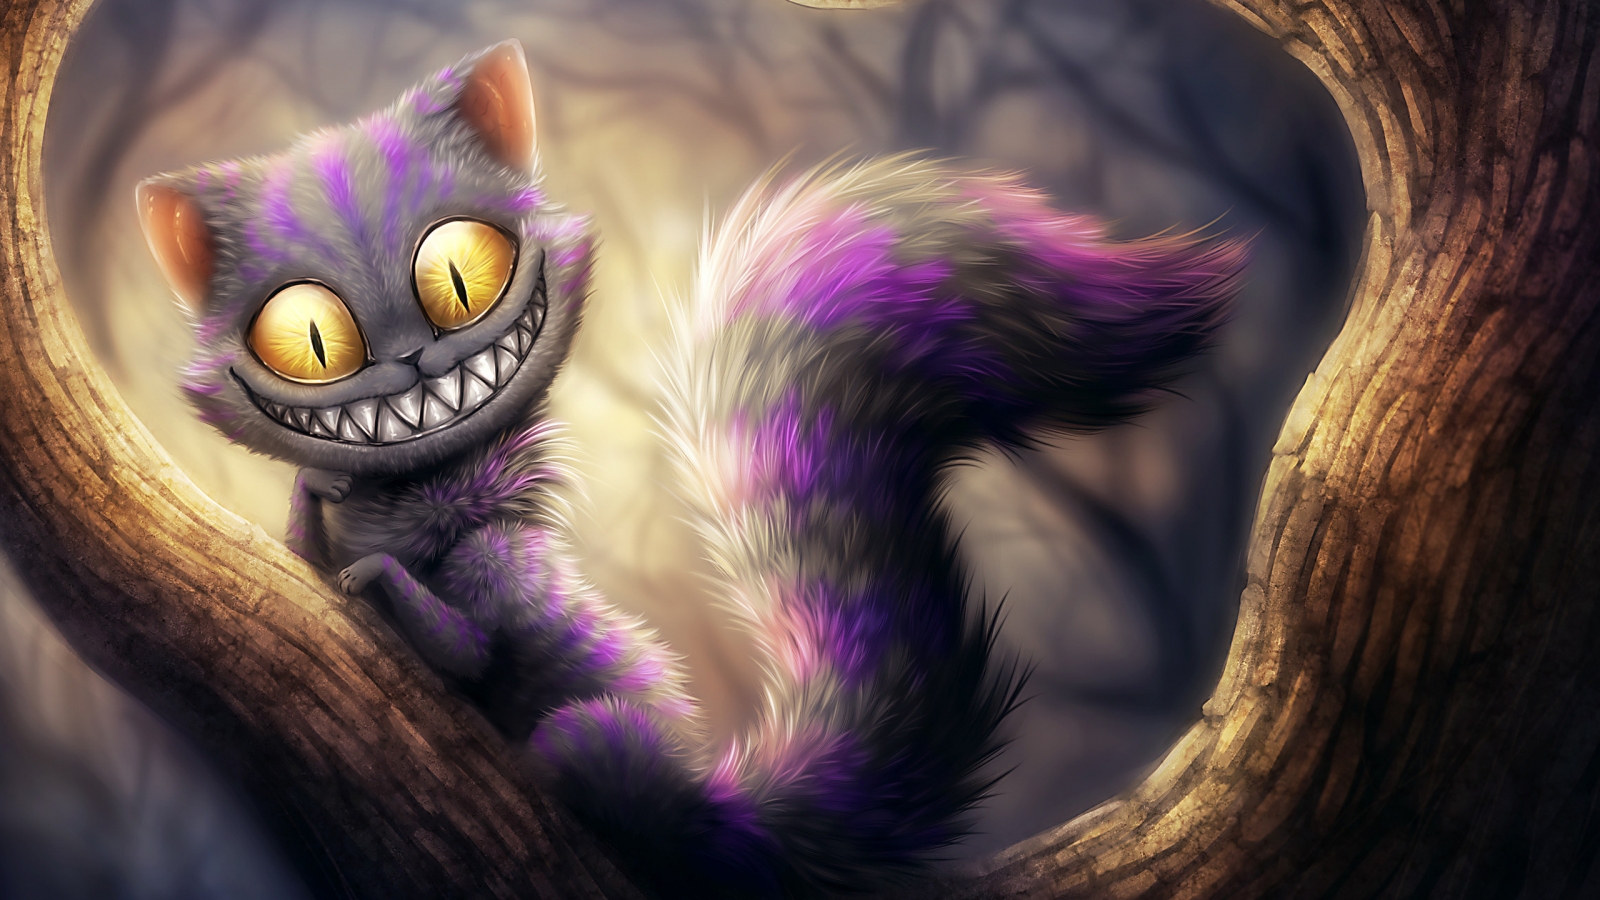 Cheshire Cat from Alice Adventures in Wonderland for 1600 x 900 HDTV resolution